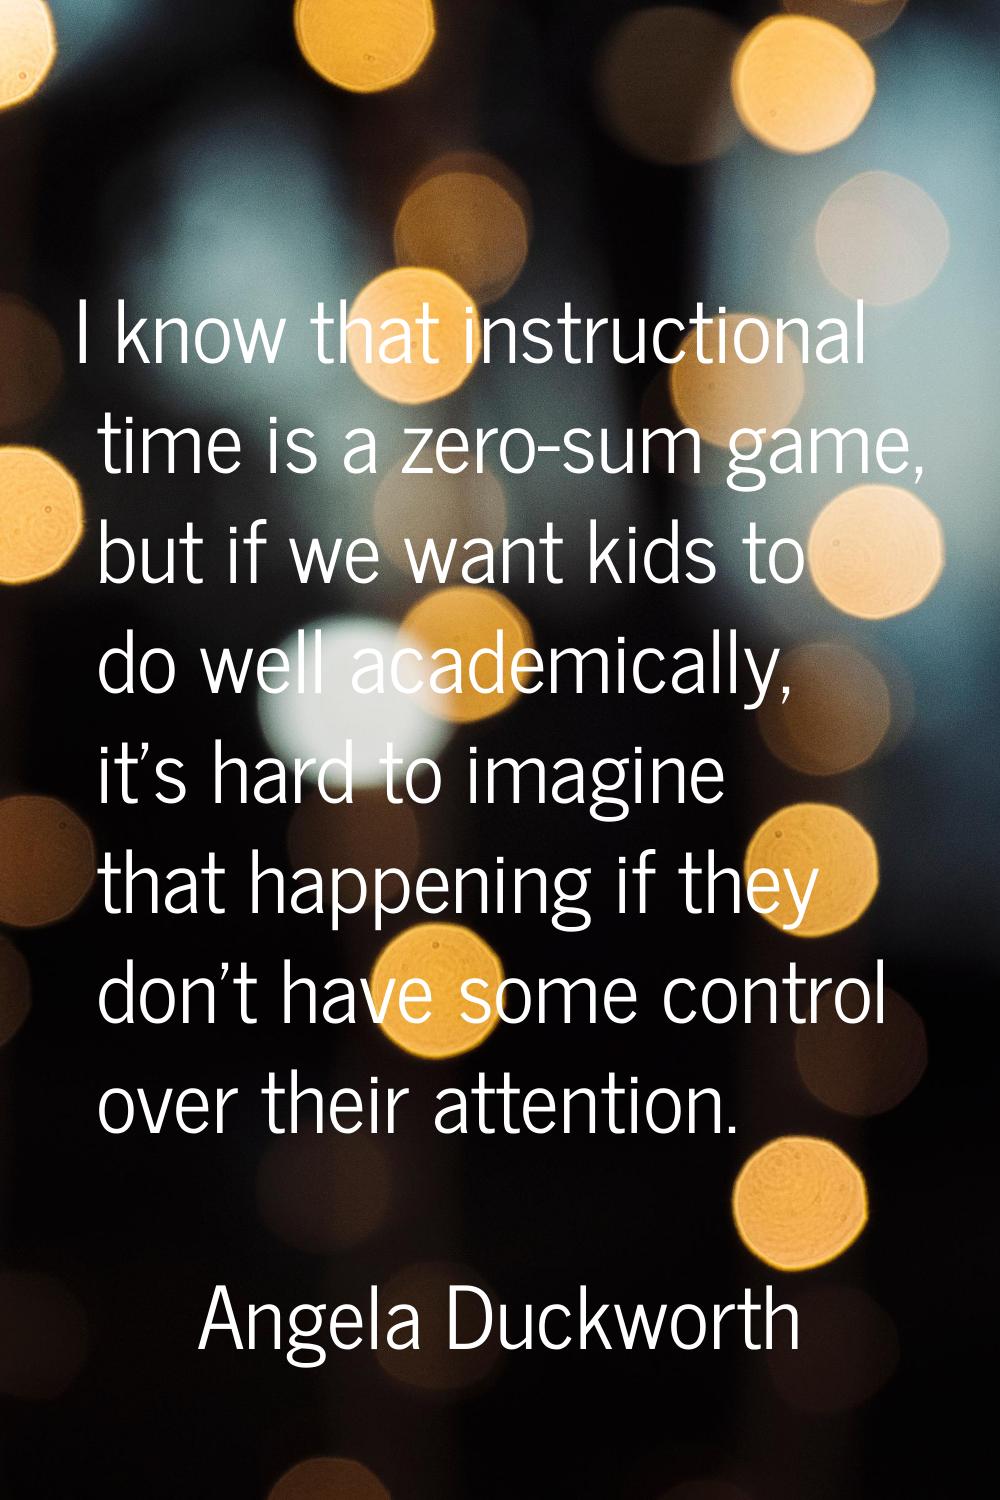 I know that instructional time is a zero-sum game, but if we want kids to do well academically, it'